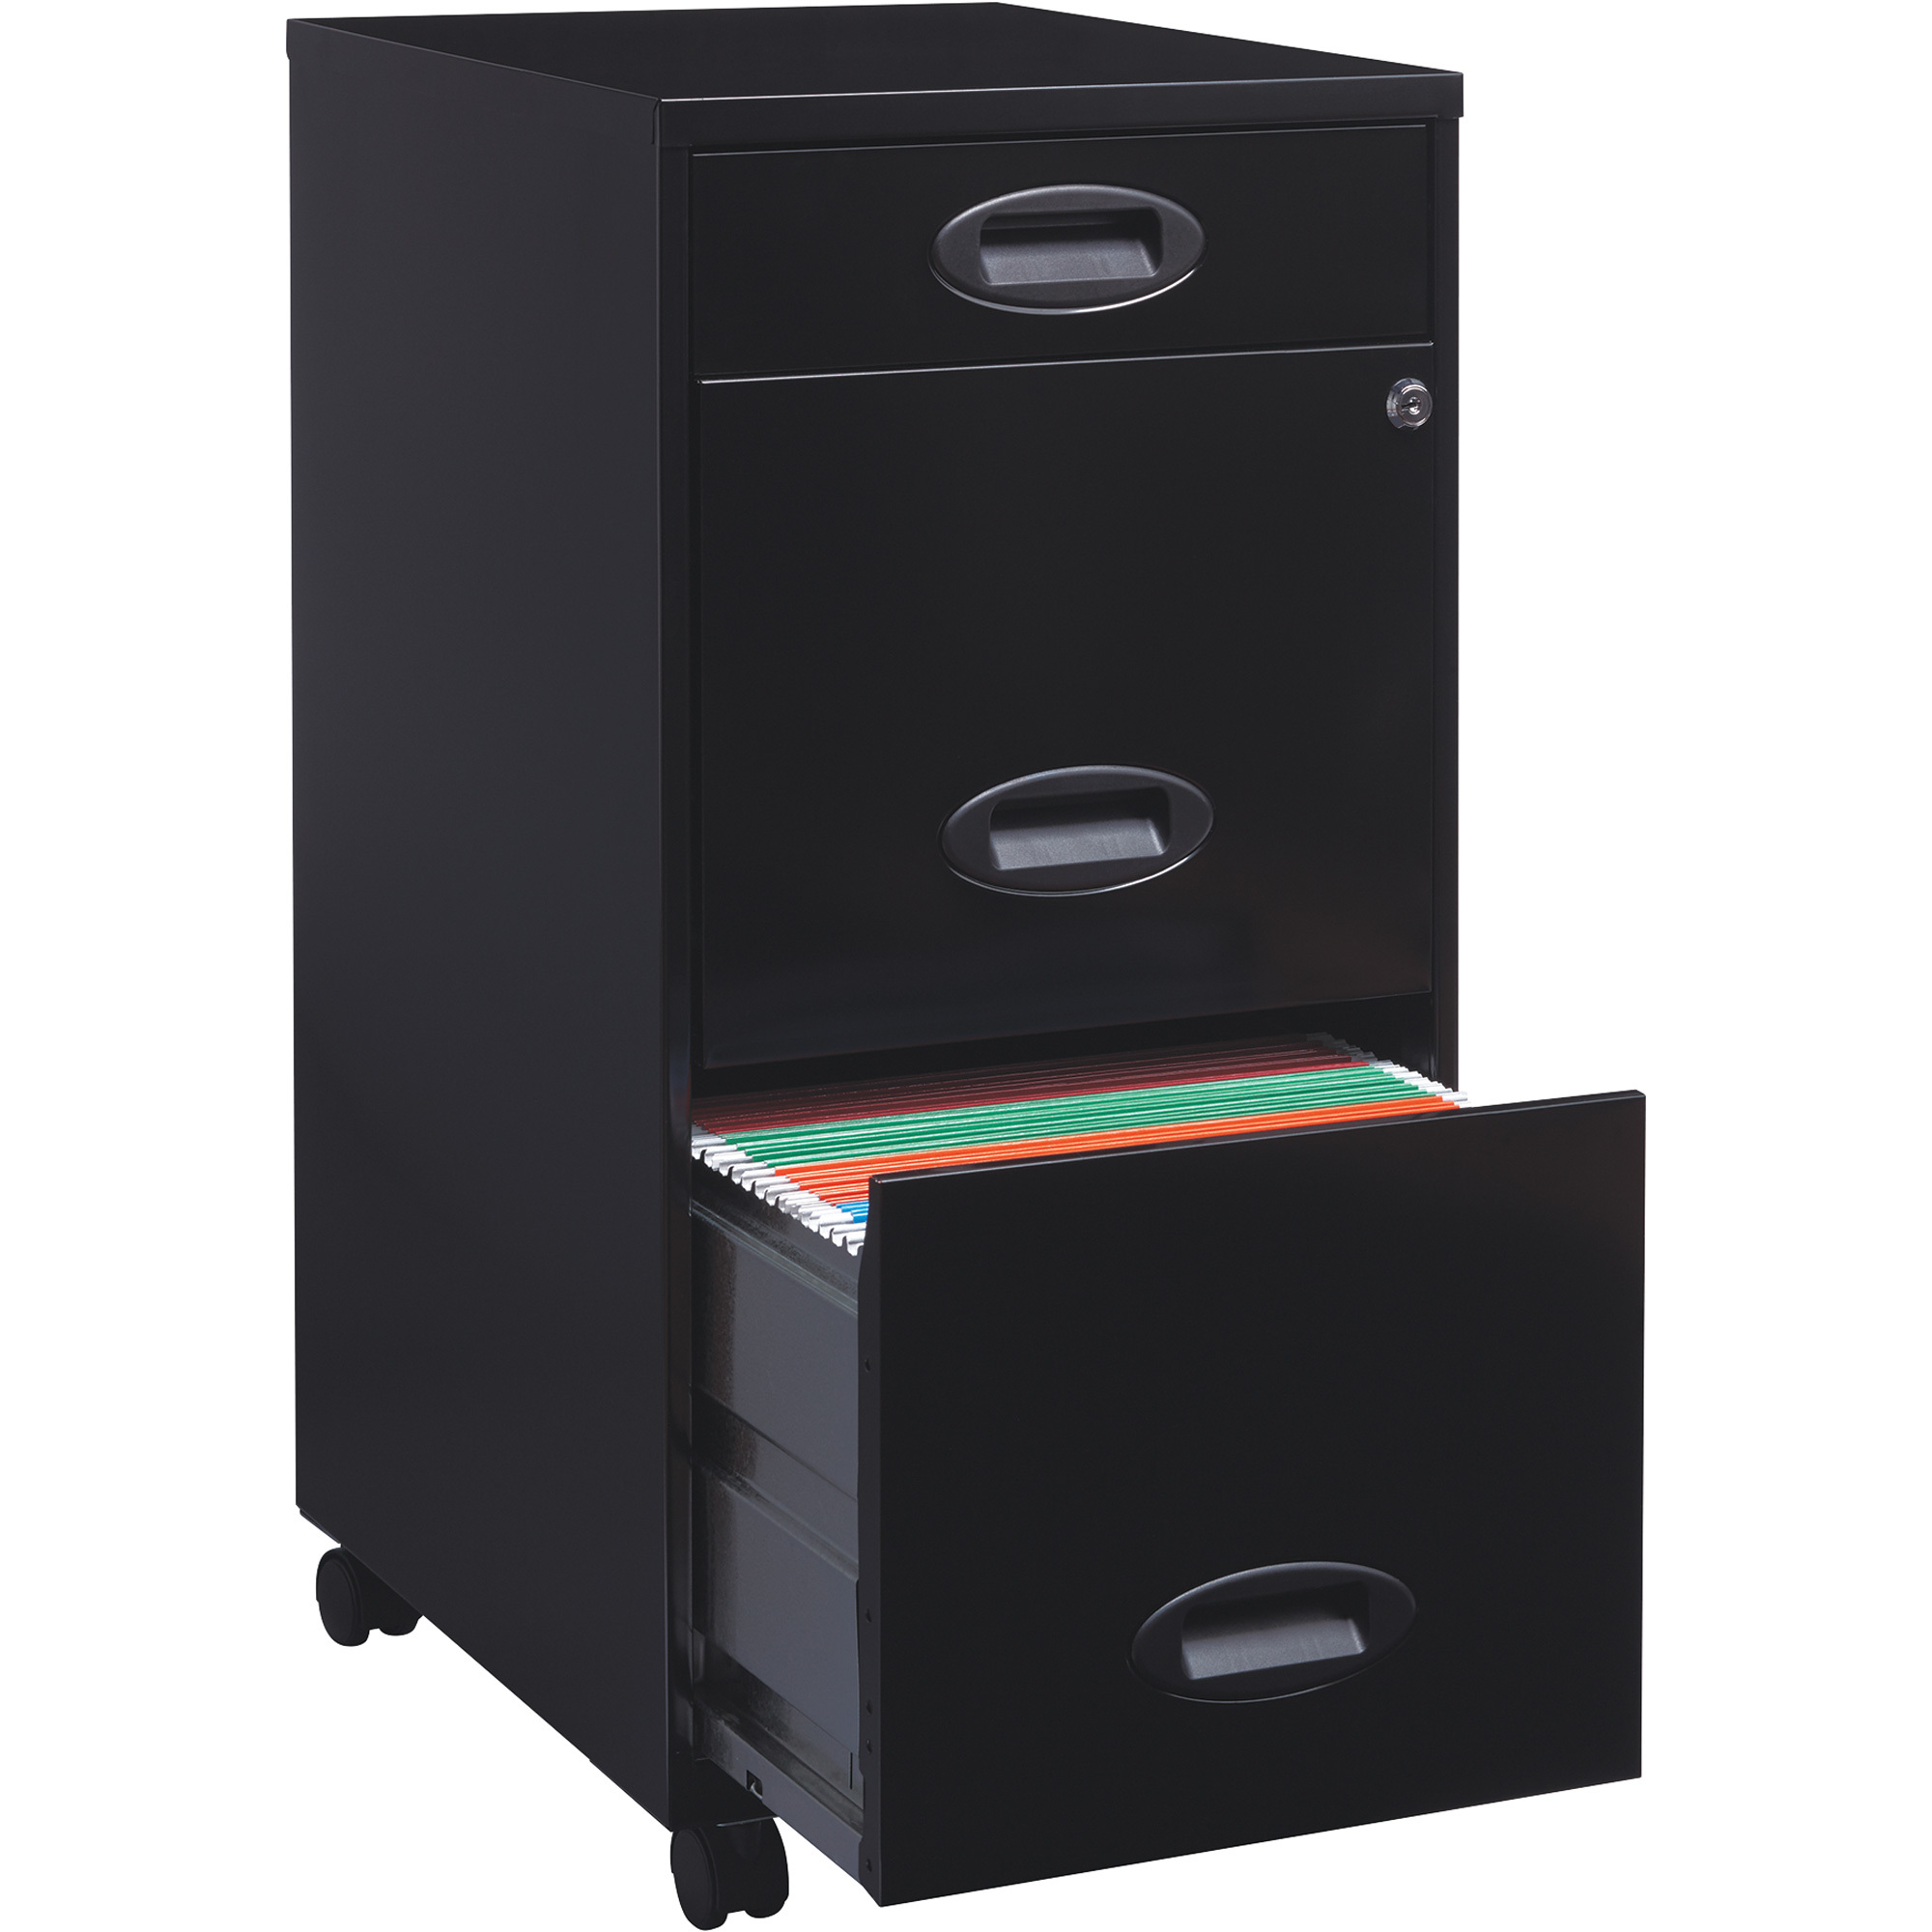 Hirsh 3-Drawer File Organizer on Pedestal with Casters â Black, 18Inch W x 14 1/4Inch D x 29 1/2Inch H, Model 17427